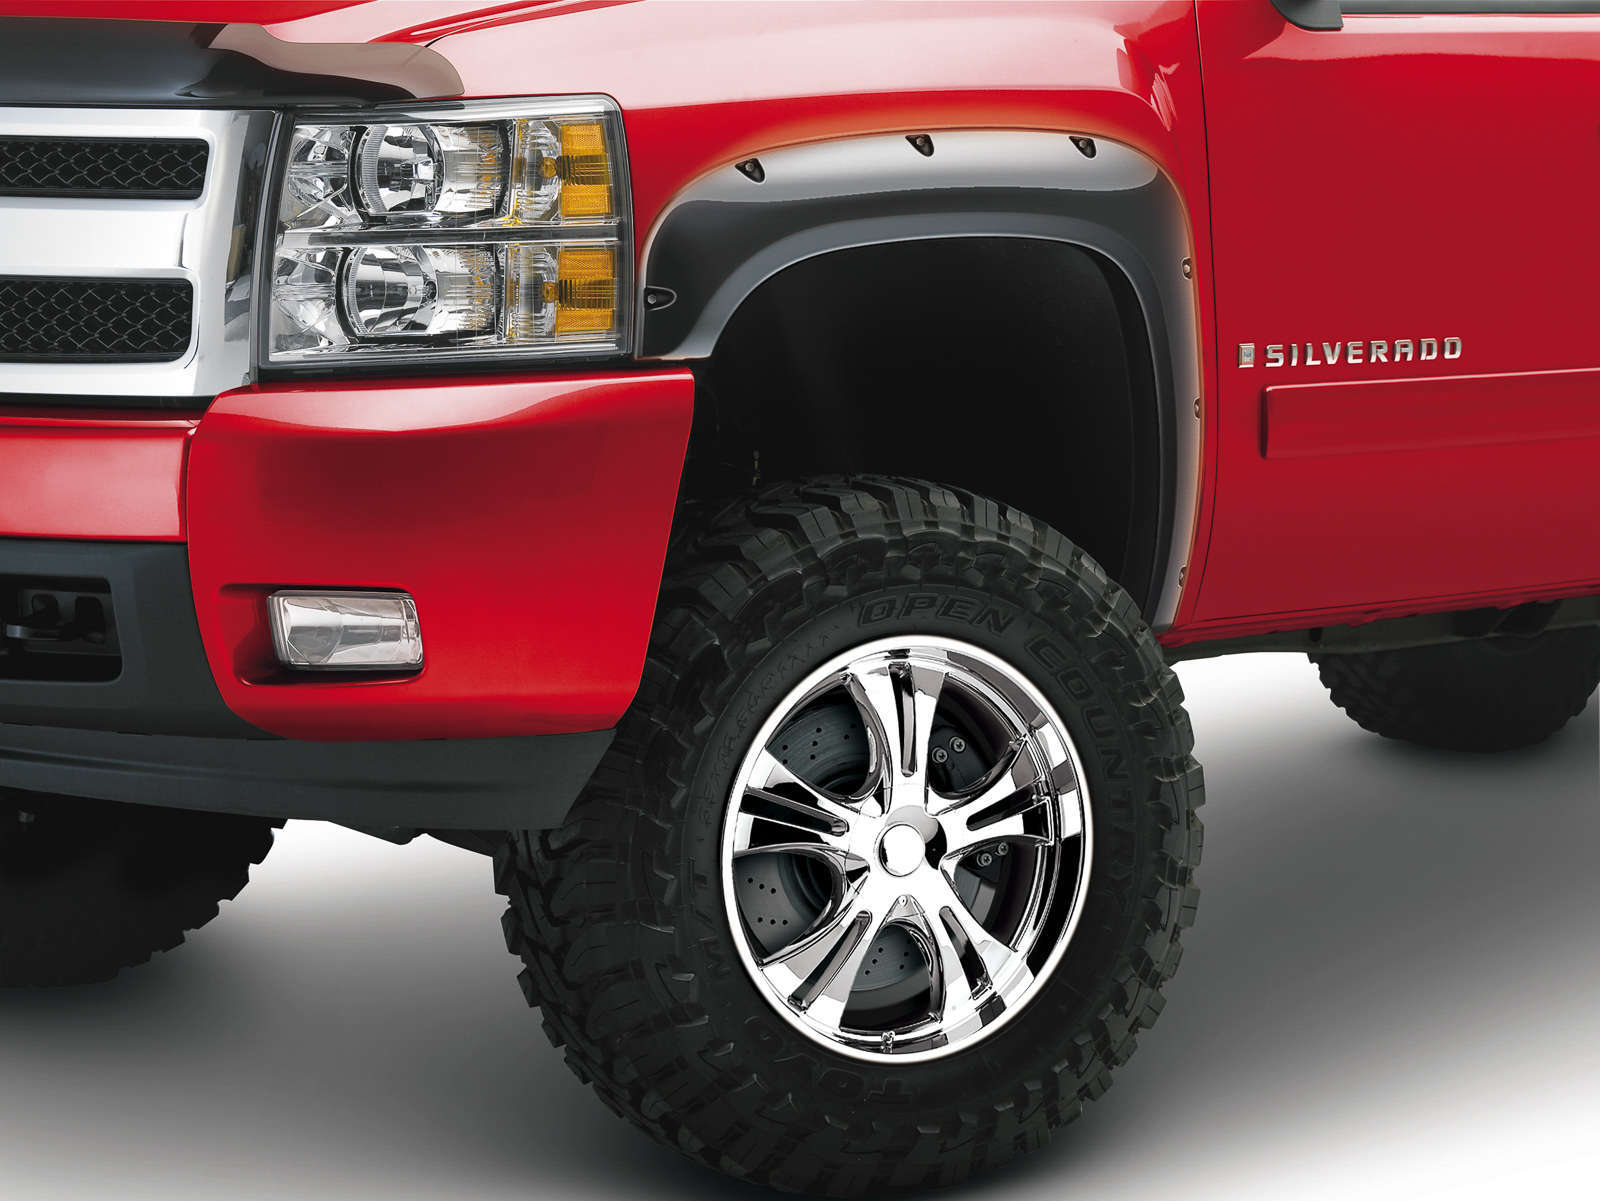 EGR 2007-2013 Chevrolet Silverado 1500 Crew Cab Extended Cab Standard Cab Pickup 2 4 Door Short Box Only Set Of 4 Traditional Bolt-On Look Fender Flares 791404